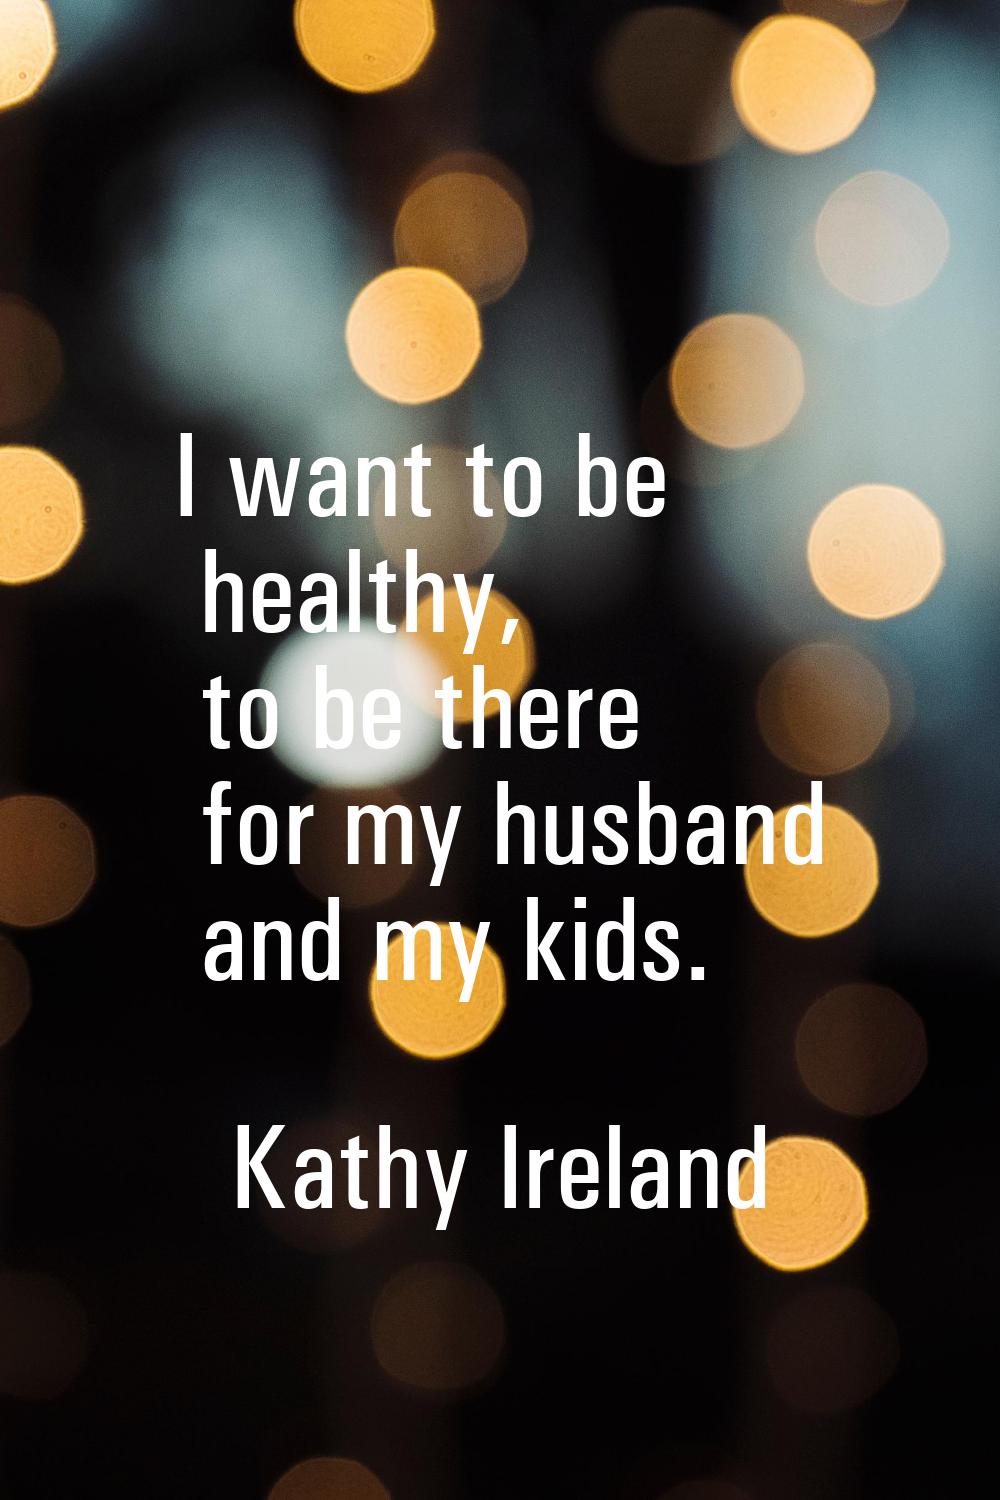 I want to be healthy, to be there for my husband and my kids.